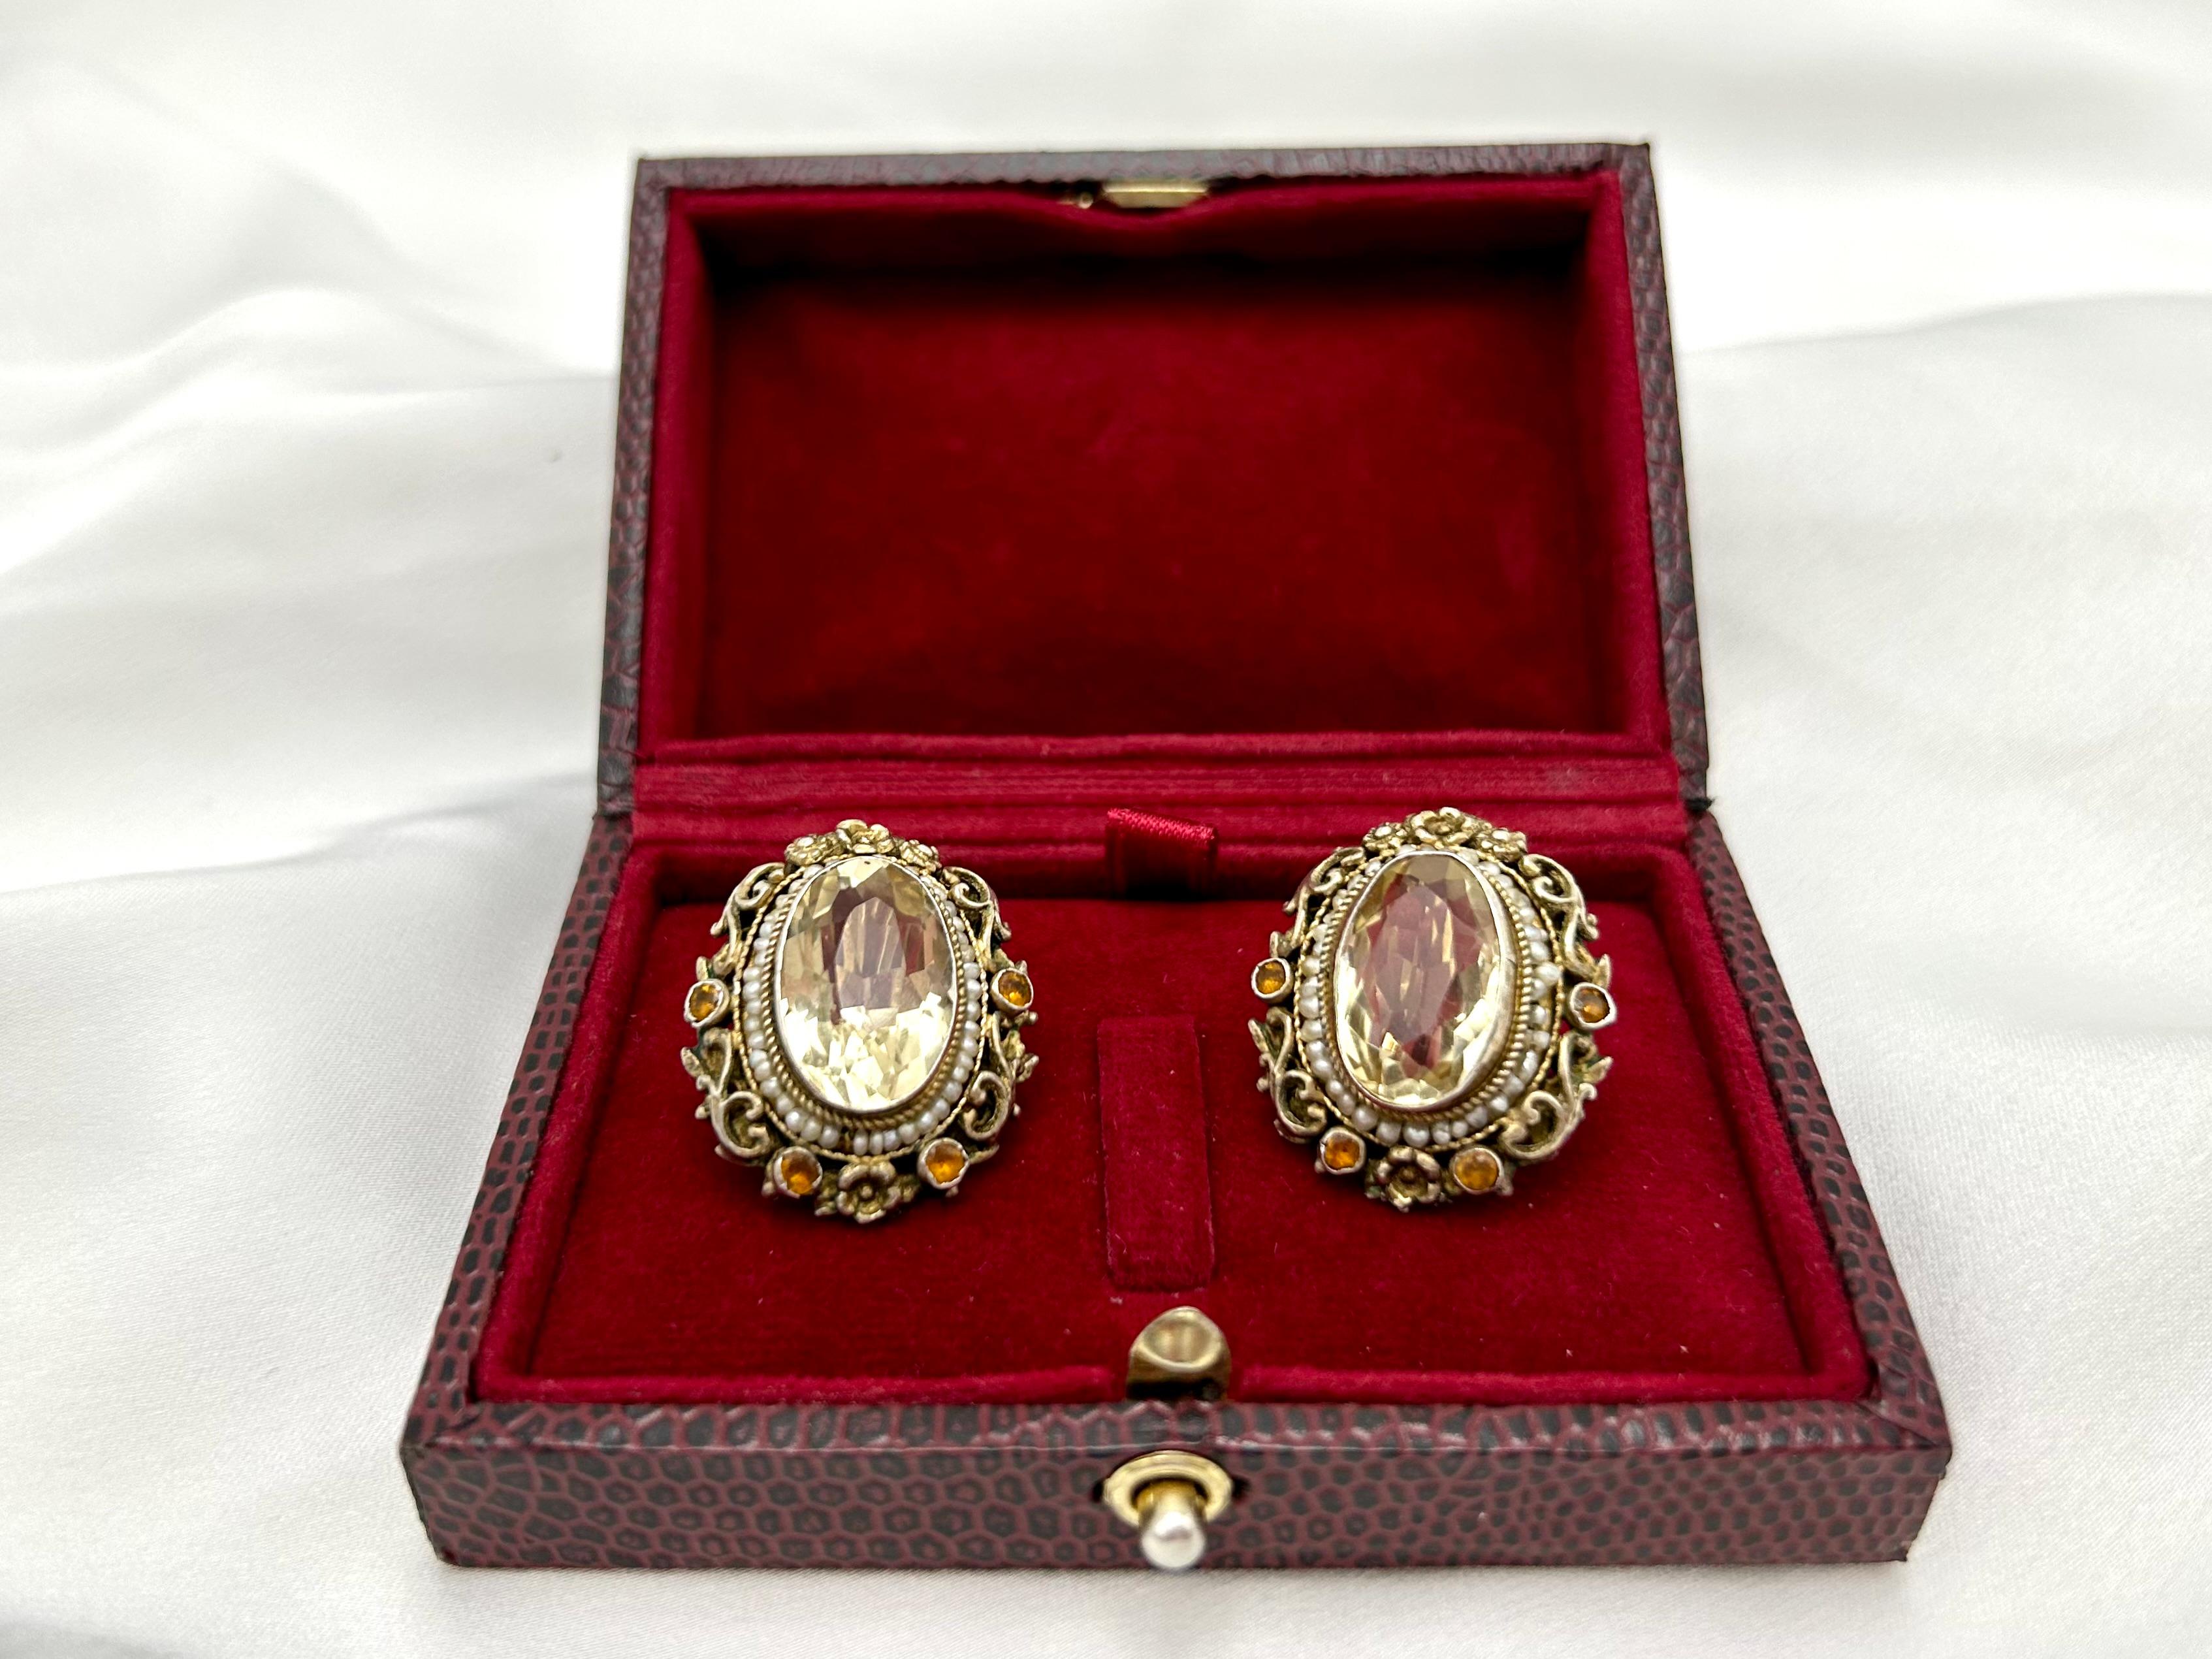 Old silver earrings with gold clasps with citrines, pearls and garnets from around 1900.

Earrings made of 0.900 sterling silver; gold clasps (reworked probably in the middle of the 20th century in Sweden) with a gold fineness of 0.750

Old type of